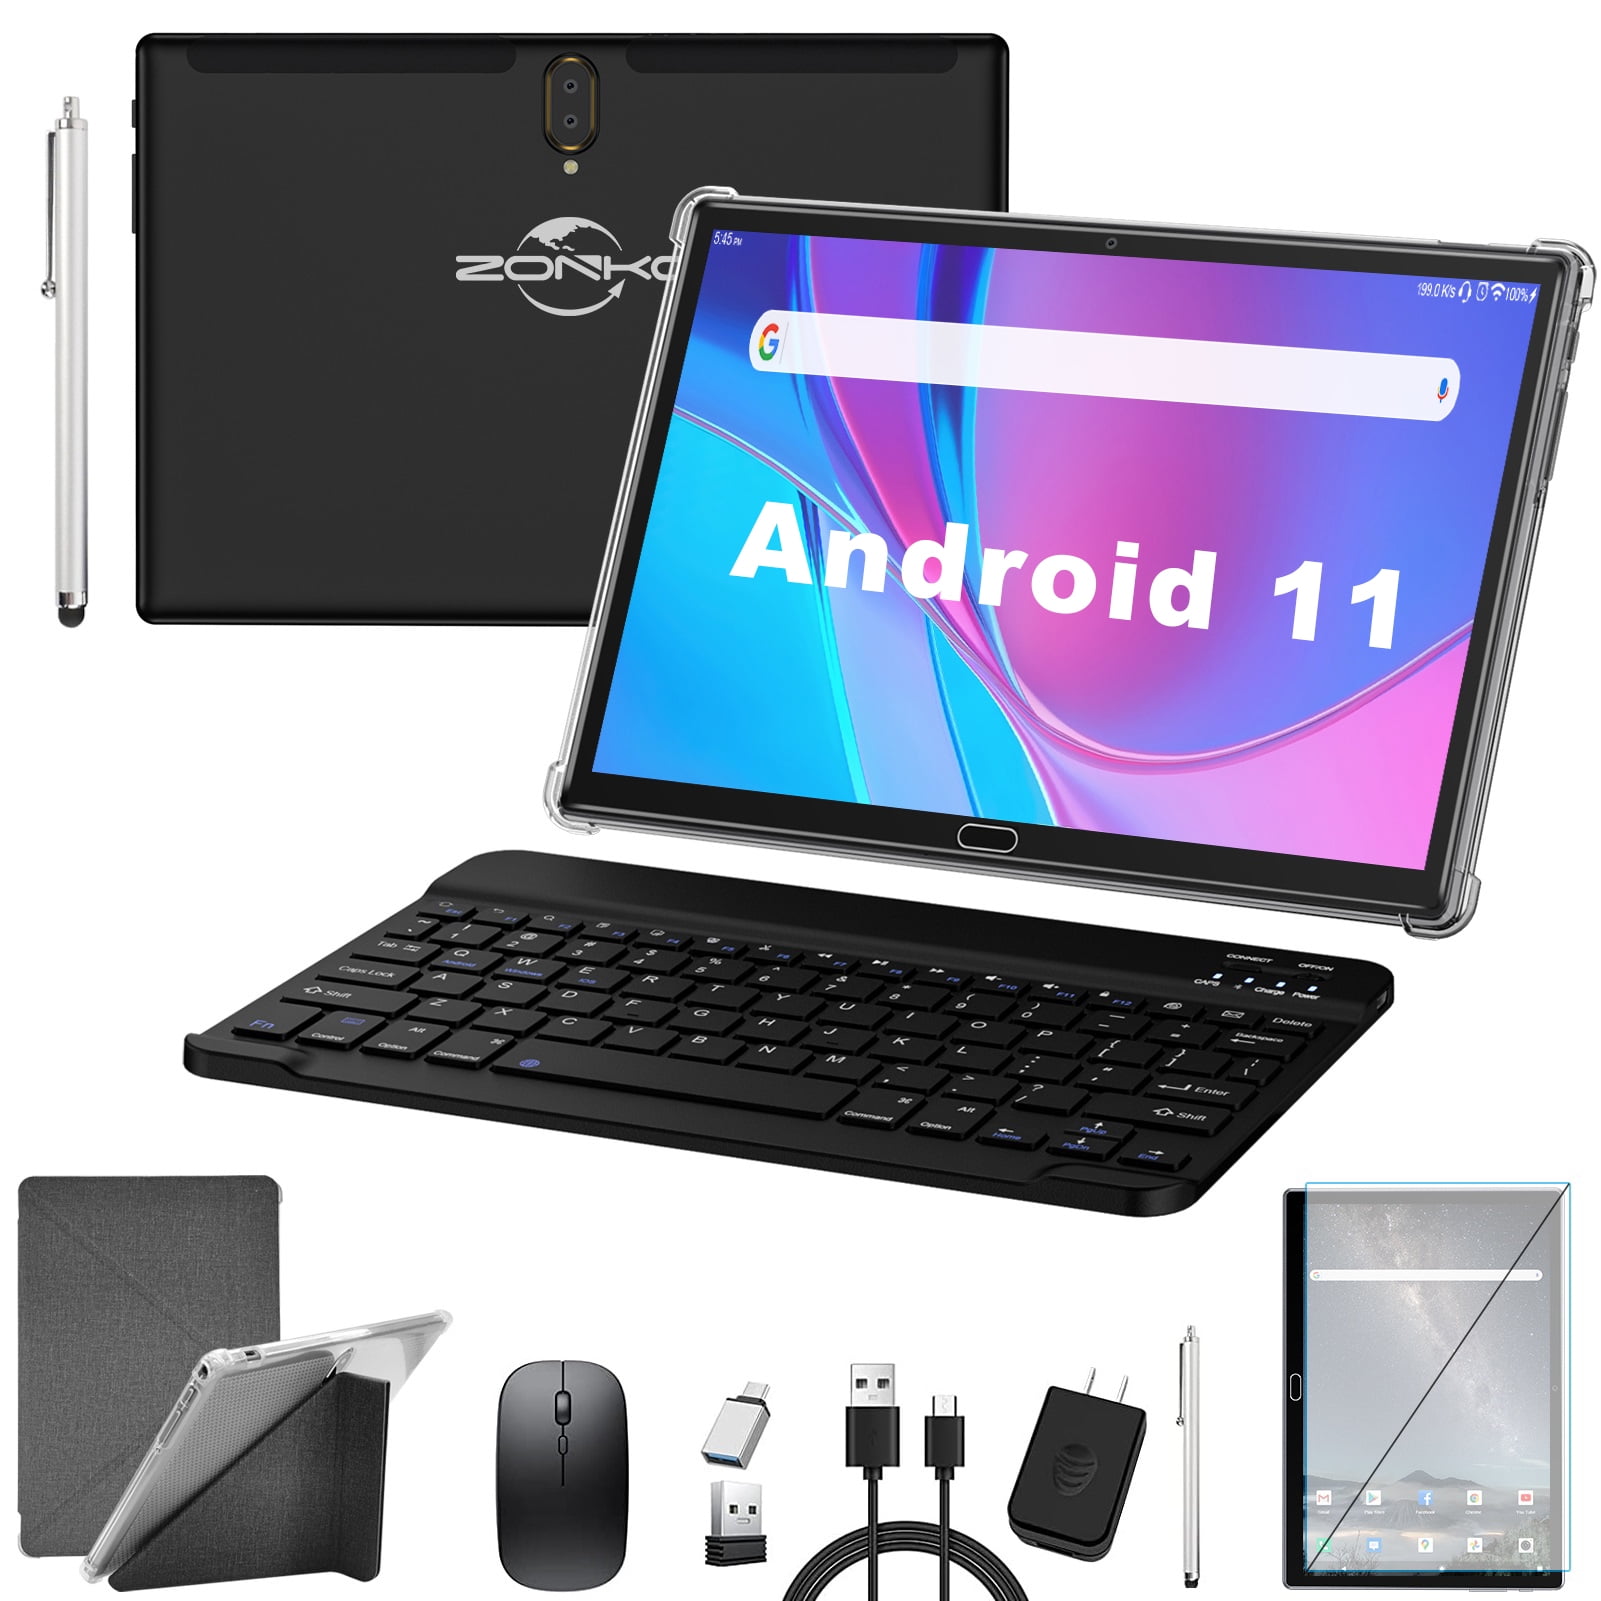 absuyy Phablet Tablet Deals- android 10 Tablet PC Pa15 Octa Core Notebook  Google Play WIFI WPS Office GPS Gobal Version Laptop Dual SIM 10.1 inch